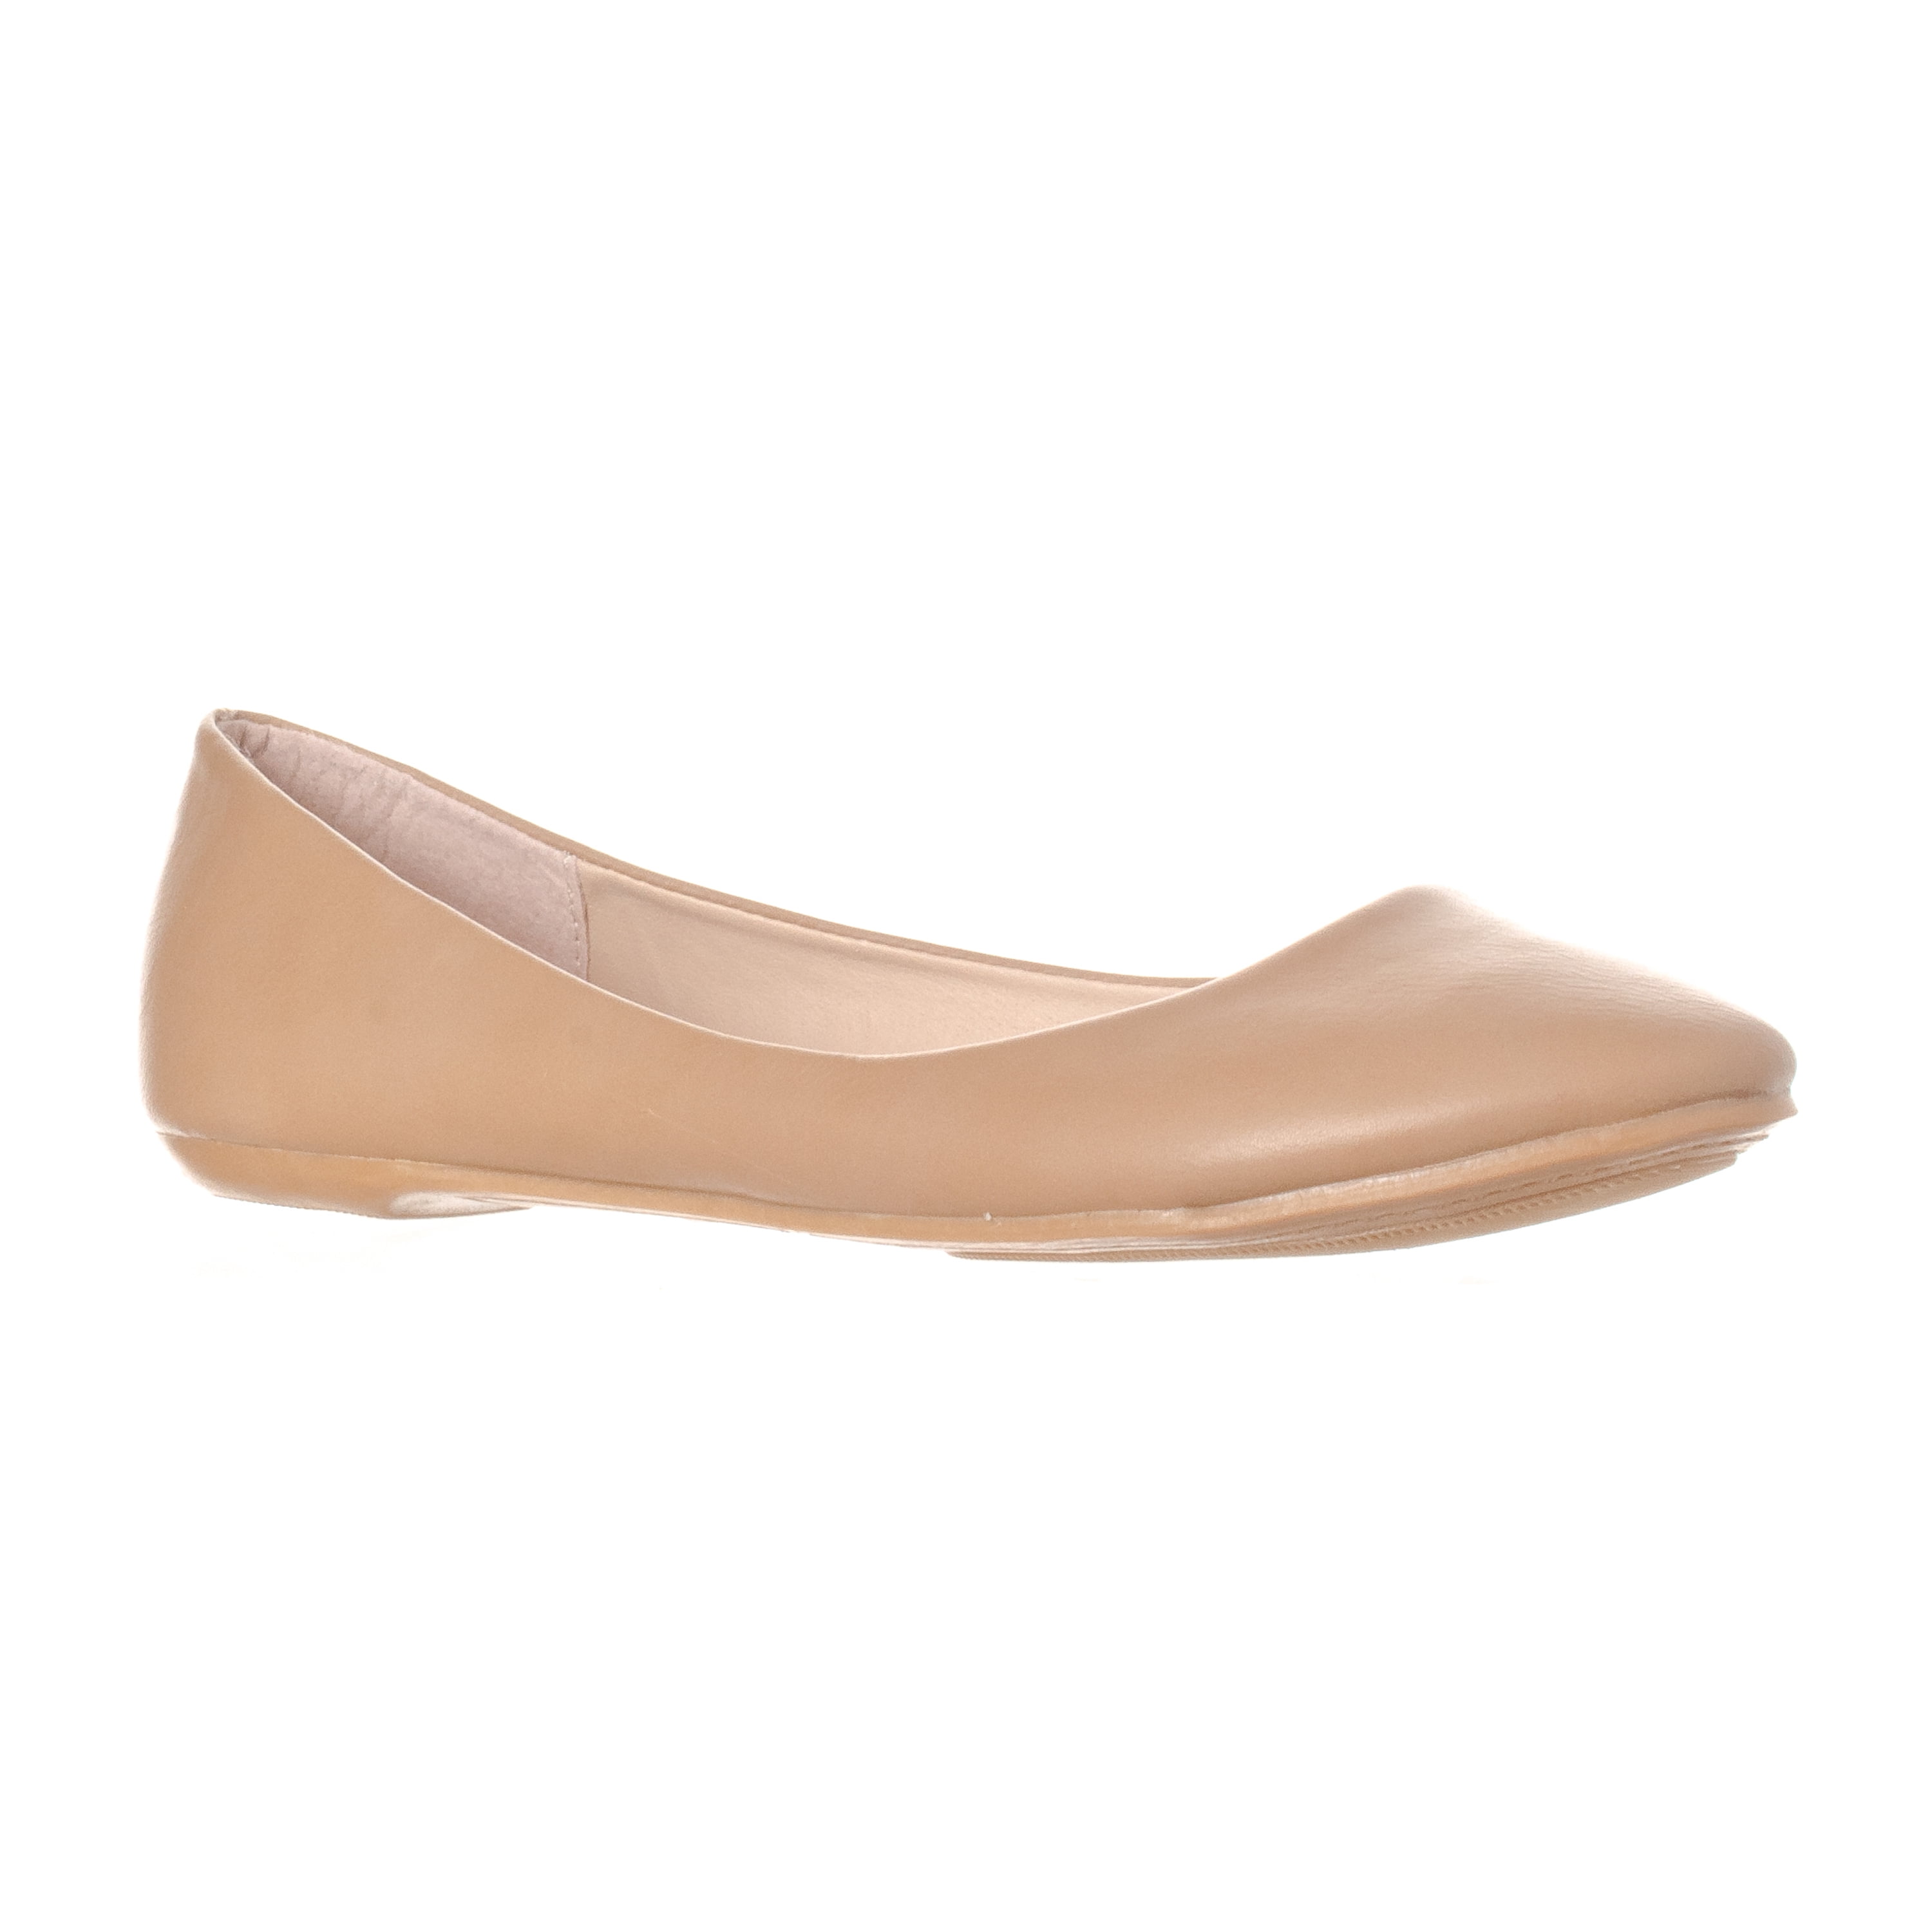 Riverberry - Riverberry Women's Aria Basic Closed Round Toe Ballet Flat ...